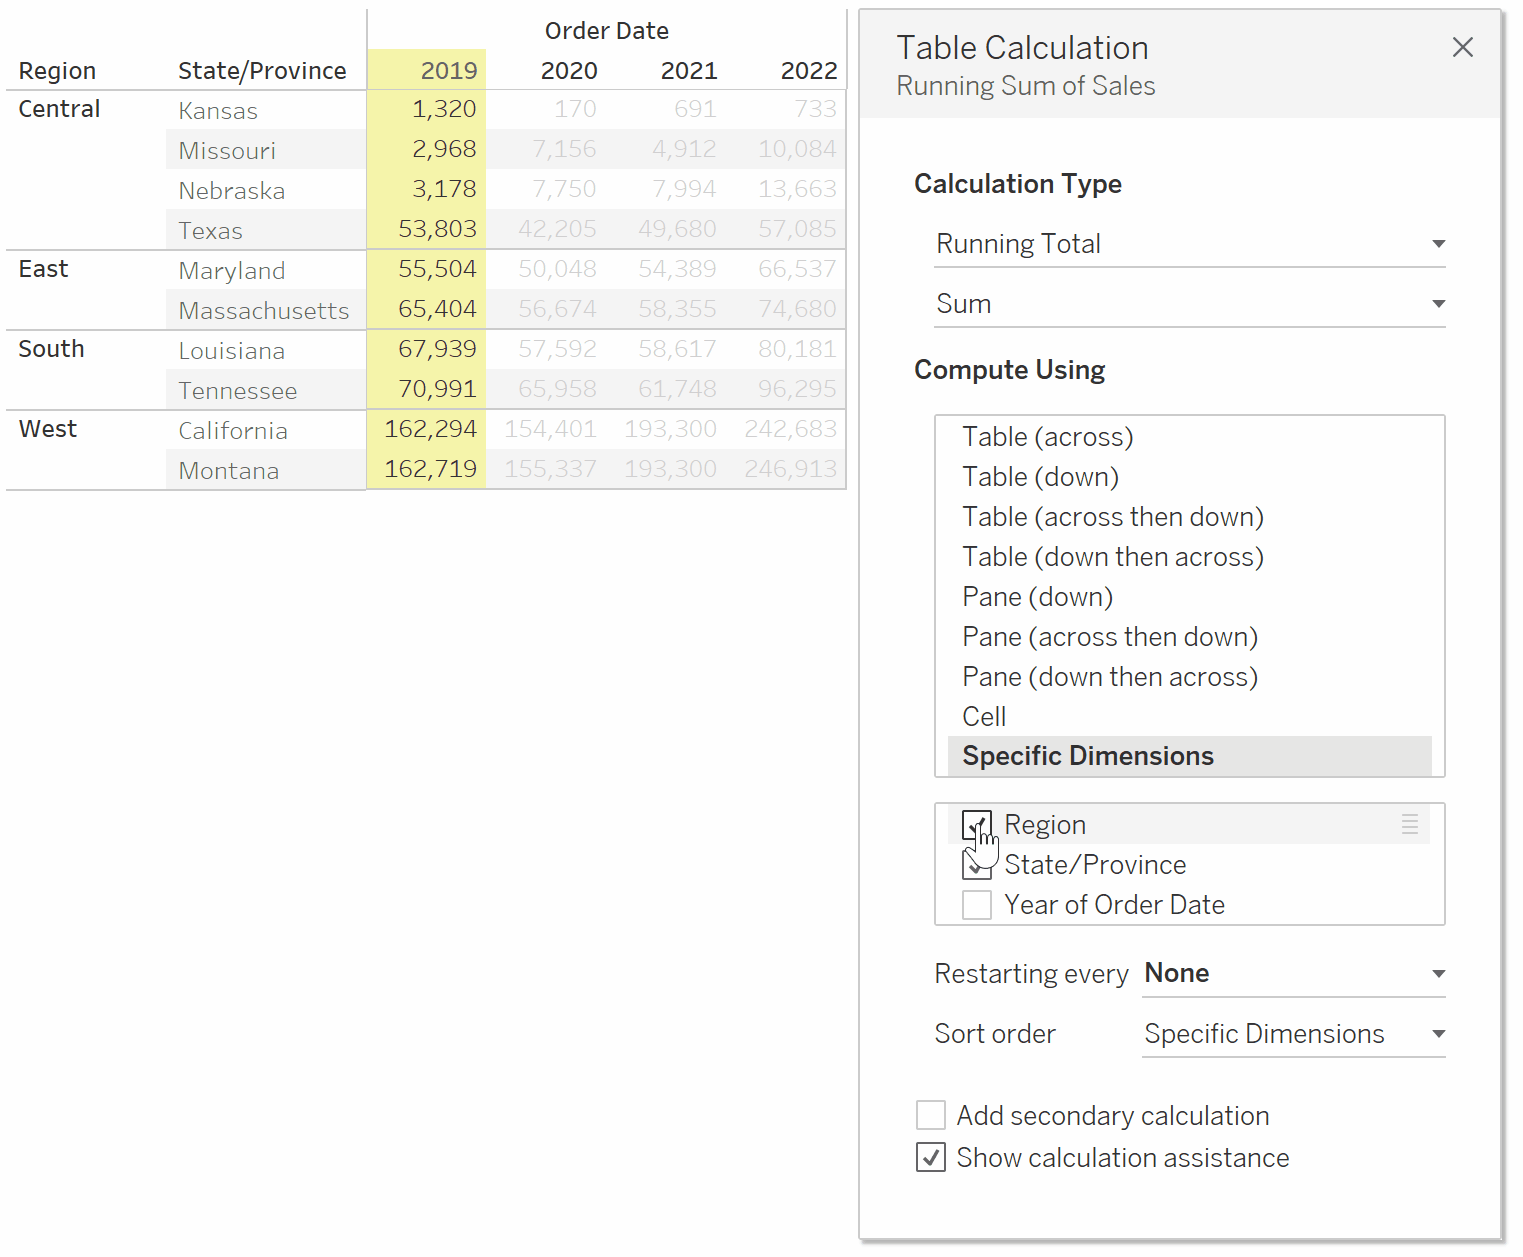 Tableau table calculations 'Specific Dimensions'